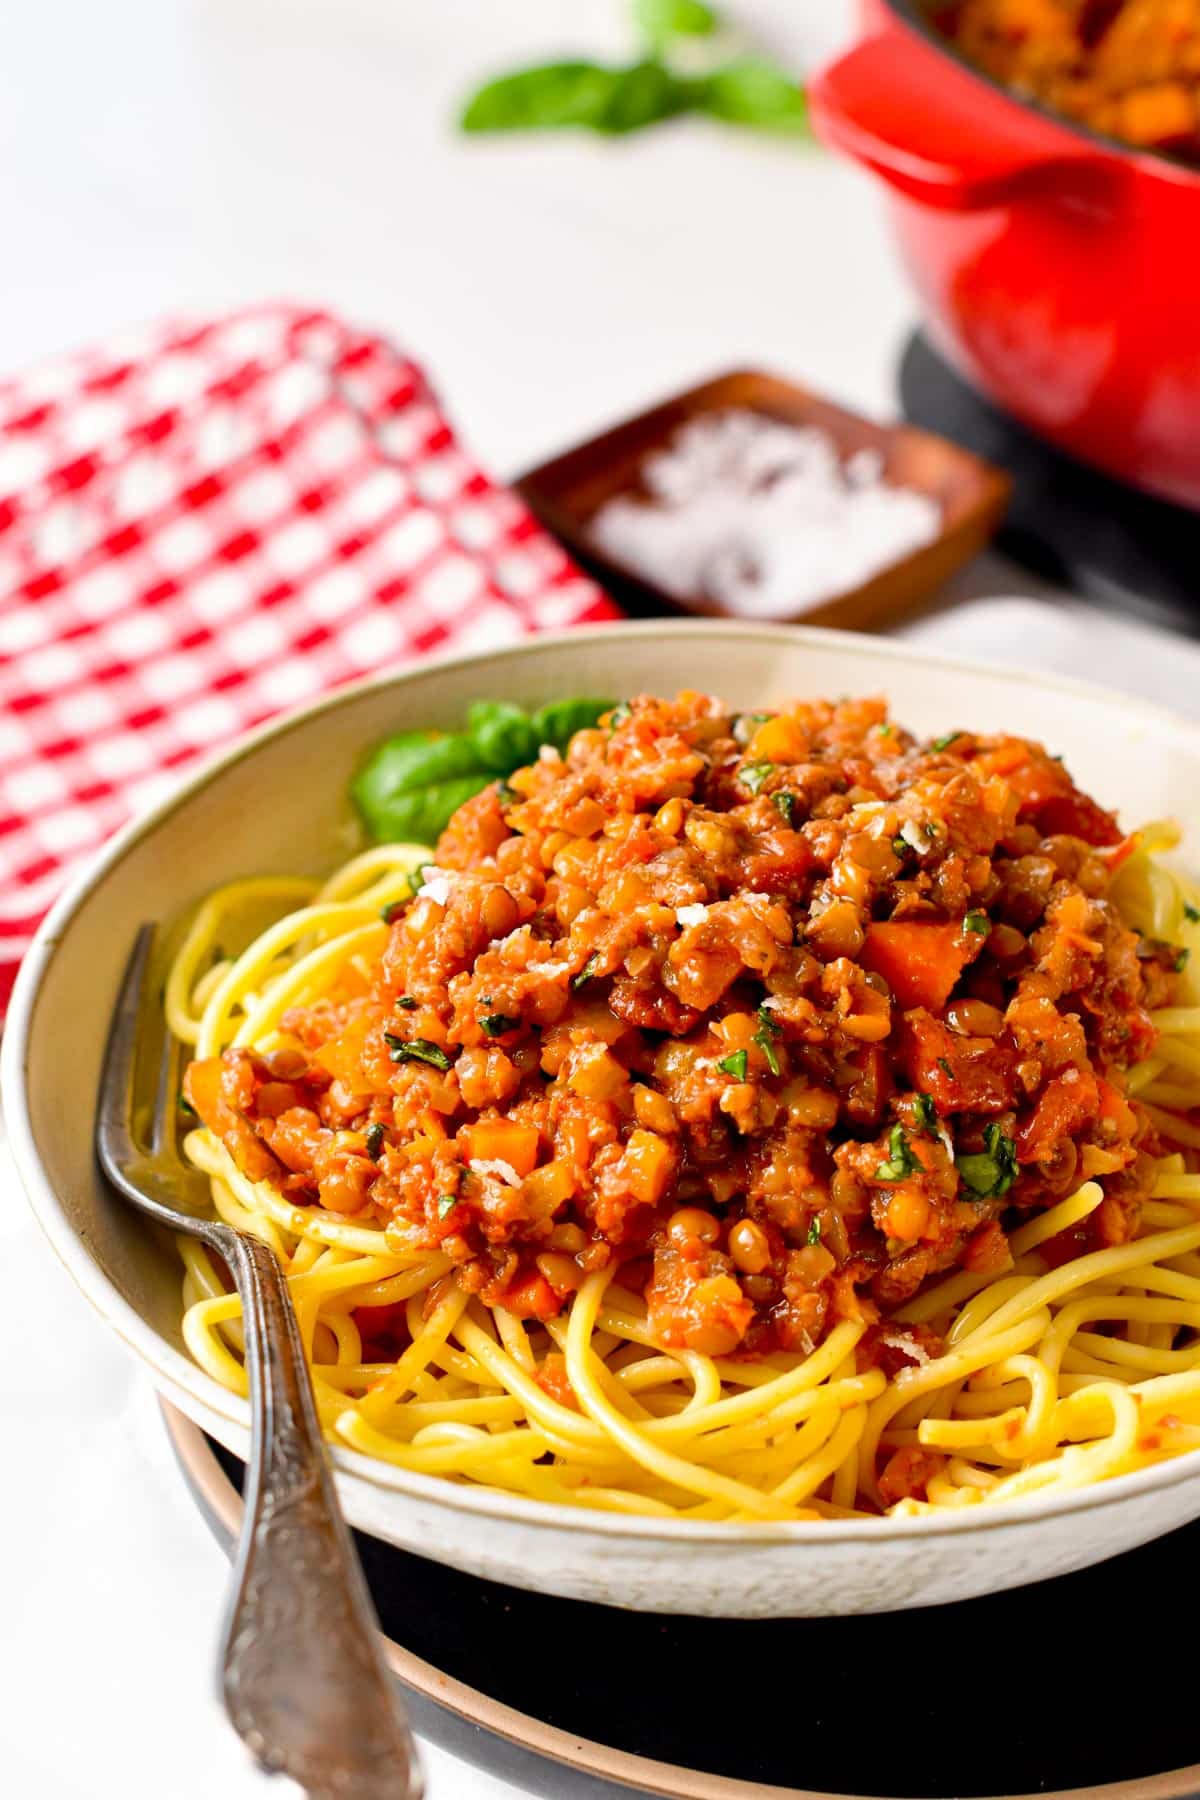 This vegan bolognese recipe is an easy healthy vegan dinner packed with the most delicious Italian flavors and more than 9 plants! If you are looking to add more plants to your plate, this lentil bolognese recipe is a must.